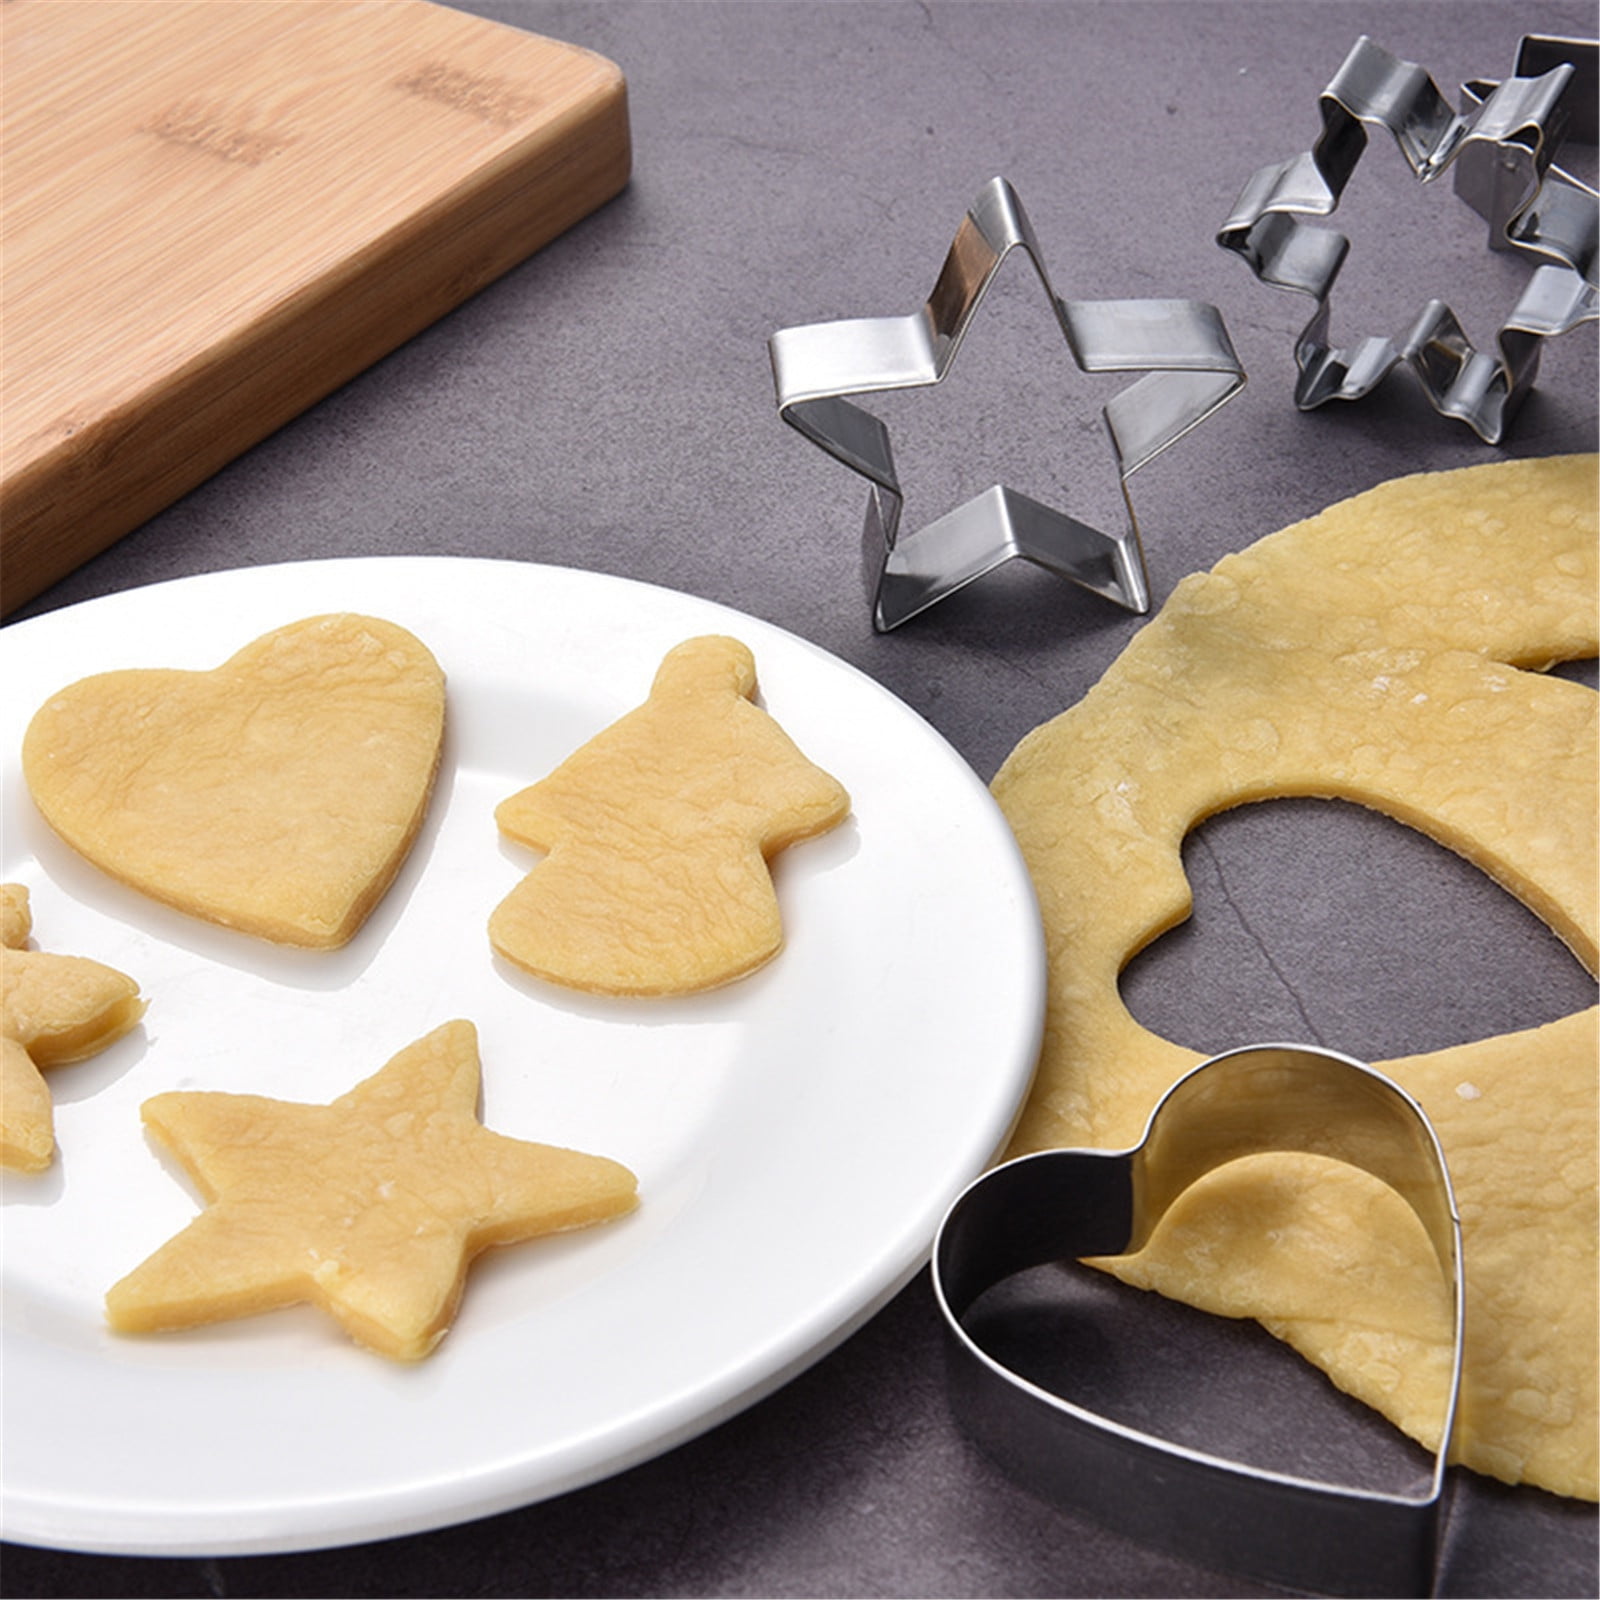 5 Packs Christmas 10 Piece Cookie Baking Mold Set Creative Baking Tools Set  For sandwich cookie cutting, flipping candy baking - AliExpress